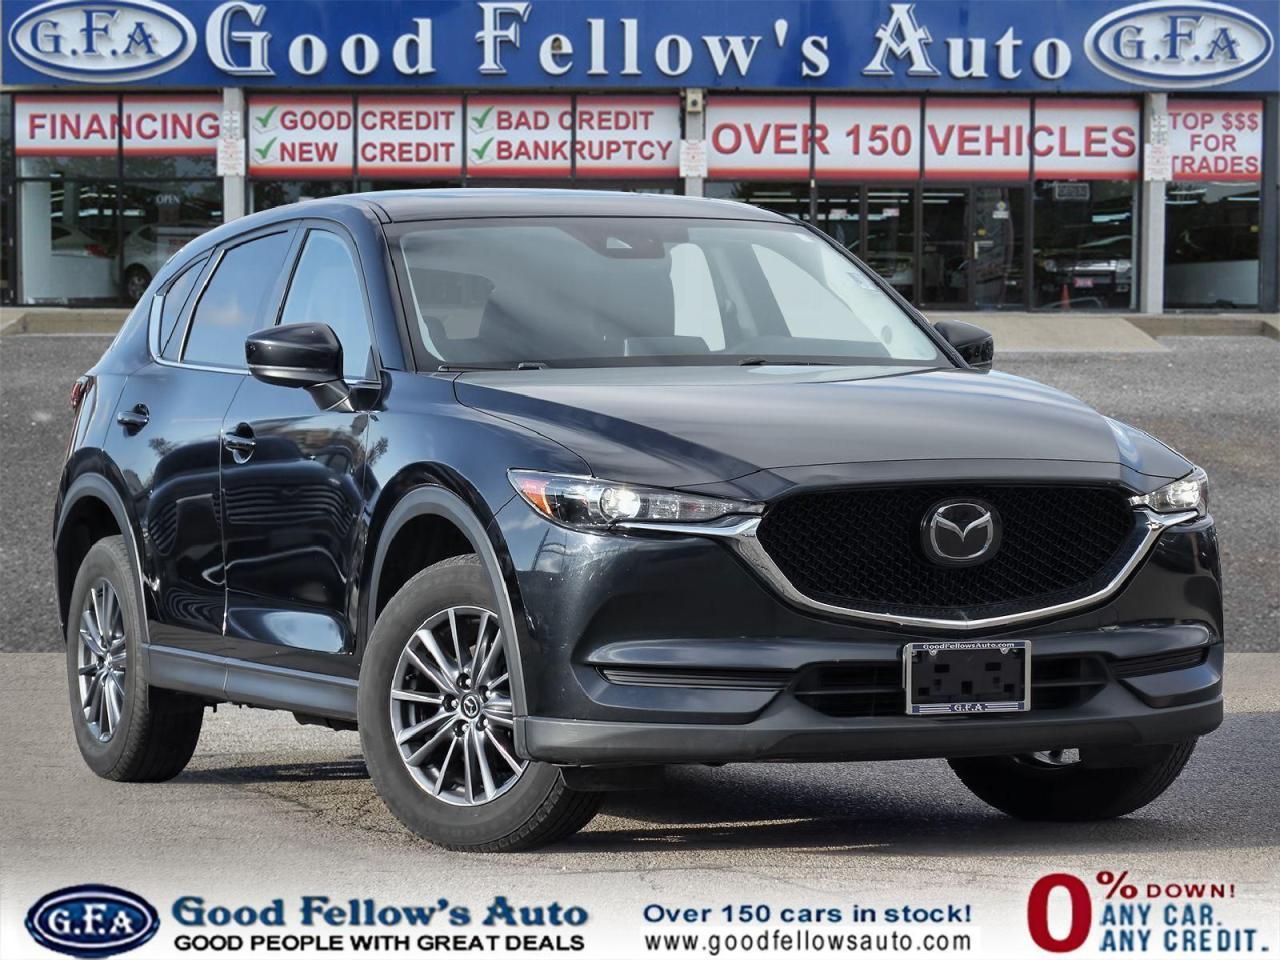 2021 Mazda CX-5 GS MODEL, COMFORT PACKAGE, AWD, SUNROOF, LEATHER & - Photo #1